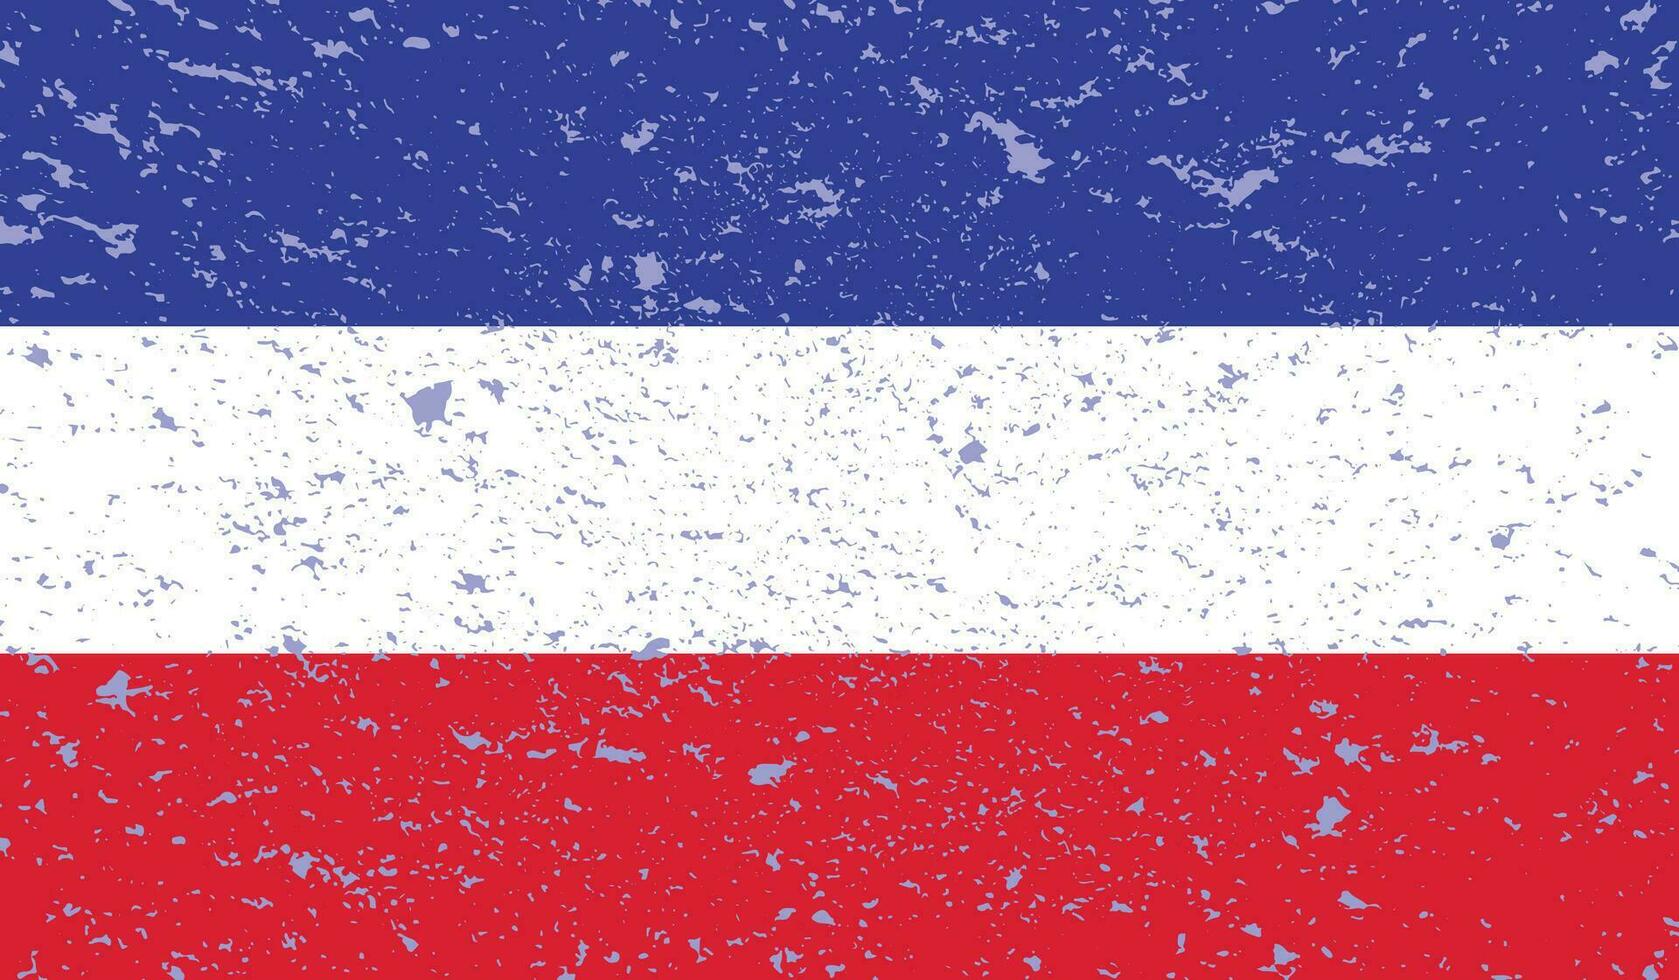 France national flag with grain textured effect vector